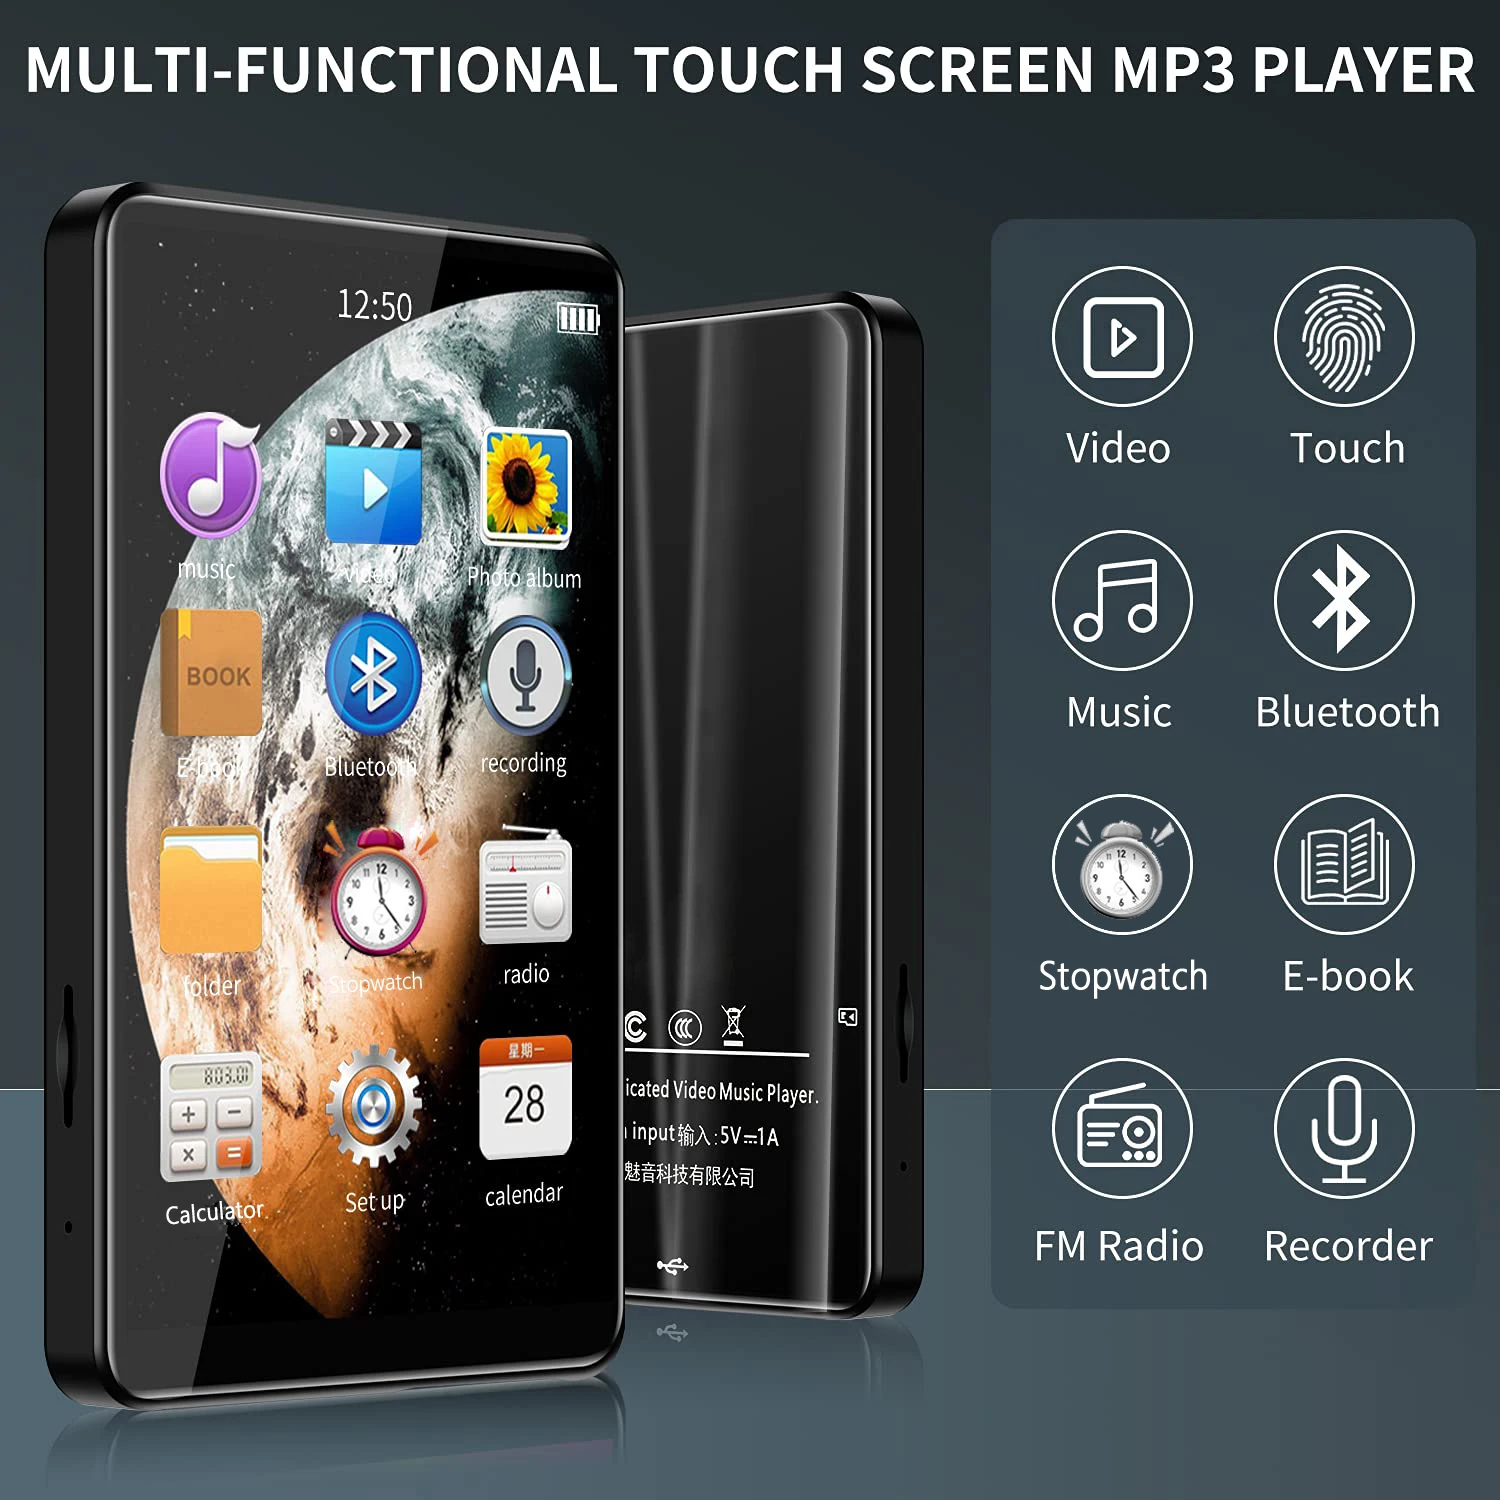 

4-inch X20 New UI MP4 Music Player Touch Screen 16GB BT5.0 With Speakers 1080P Video Playback Recording E-book FM MP3 Player